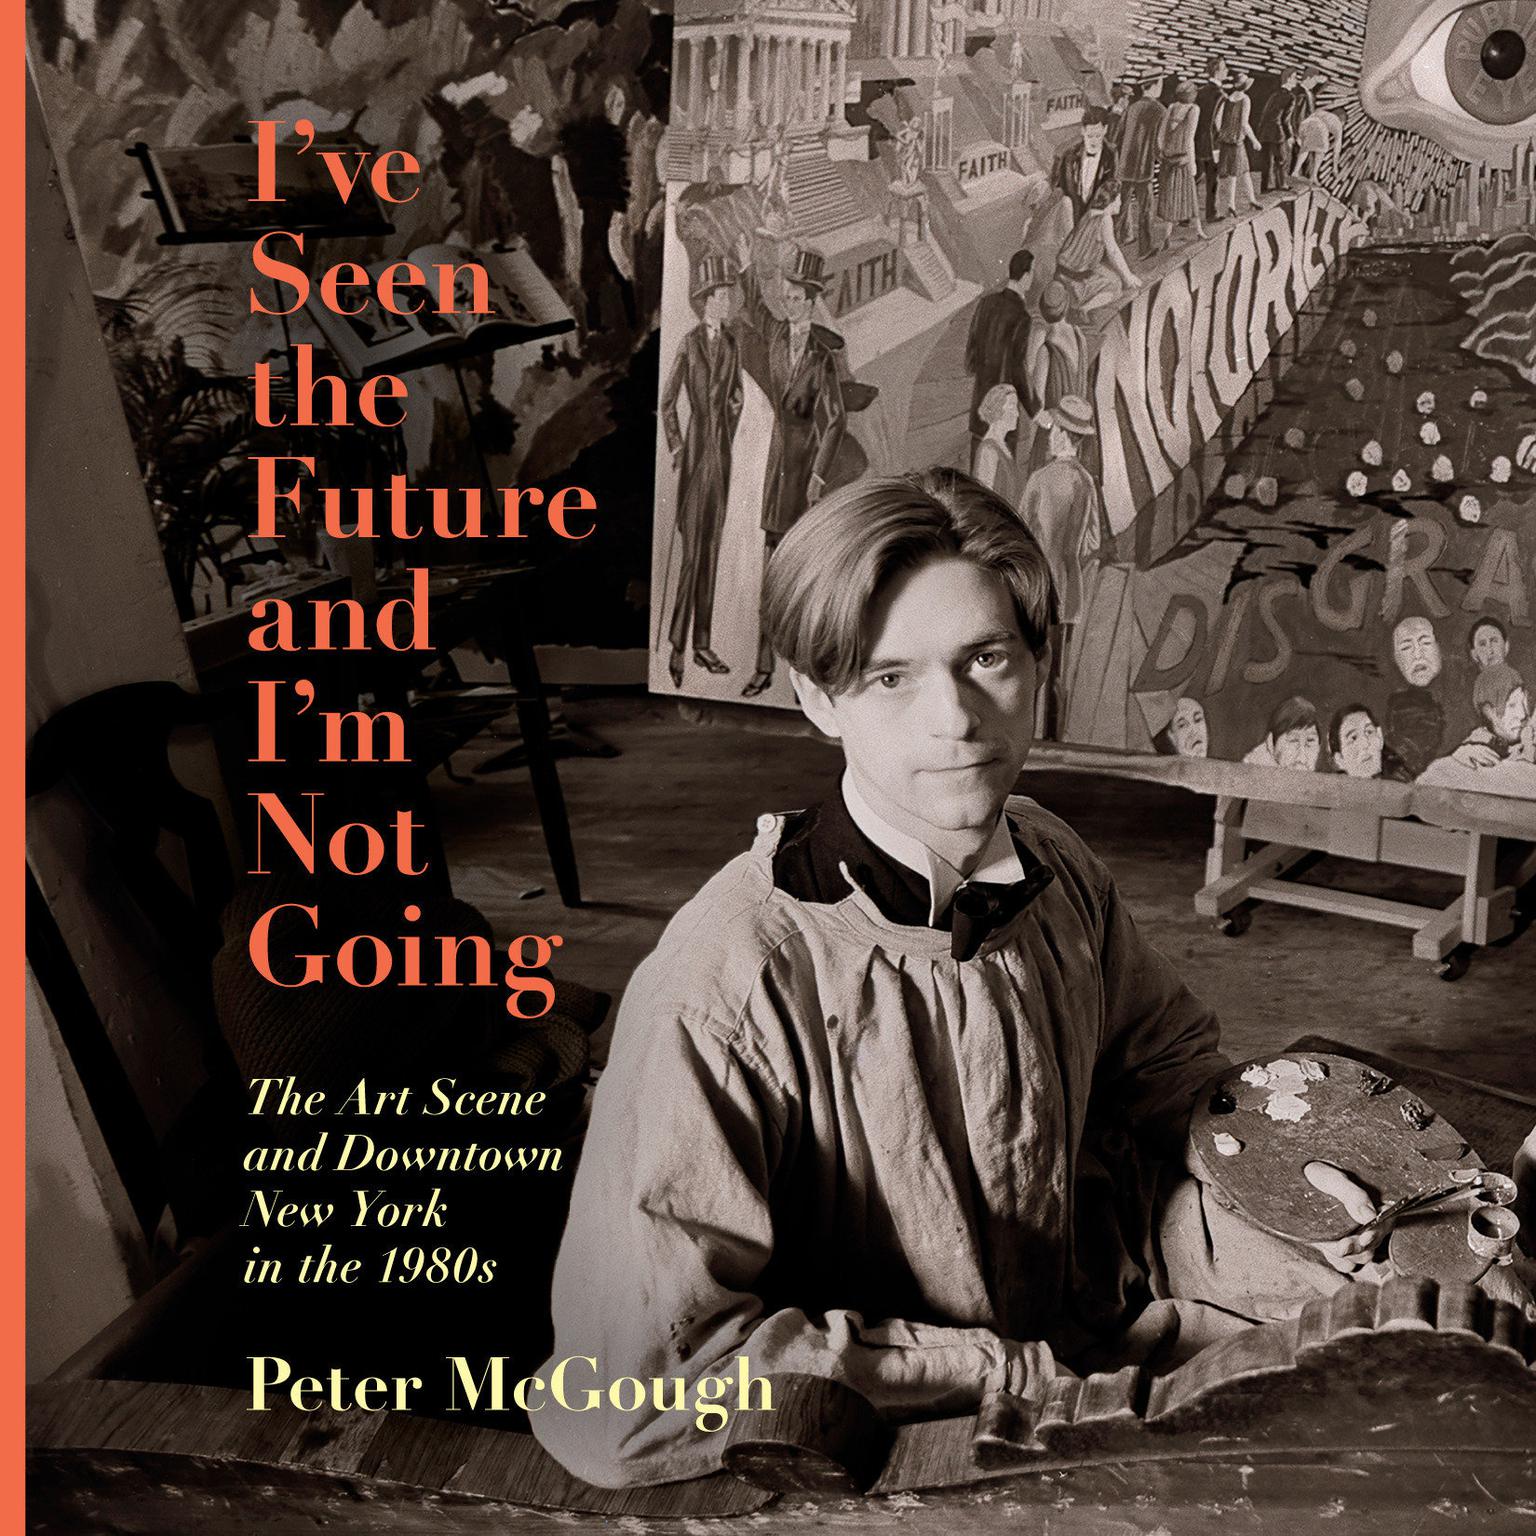 Ive Seen the Future and Im Not Going: The Art Scene and Downtown New York in the 1980s Audiobook, by Peter McGough